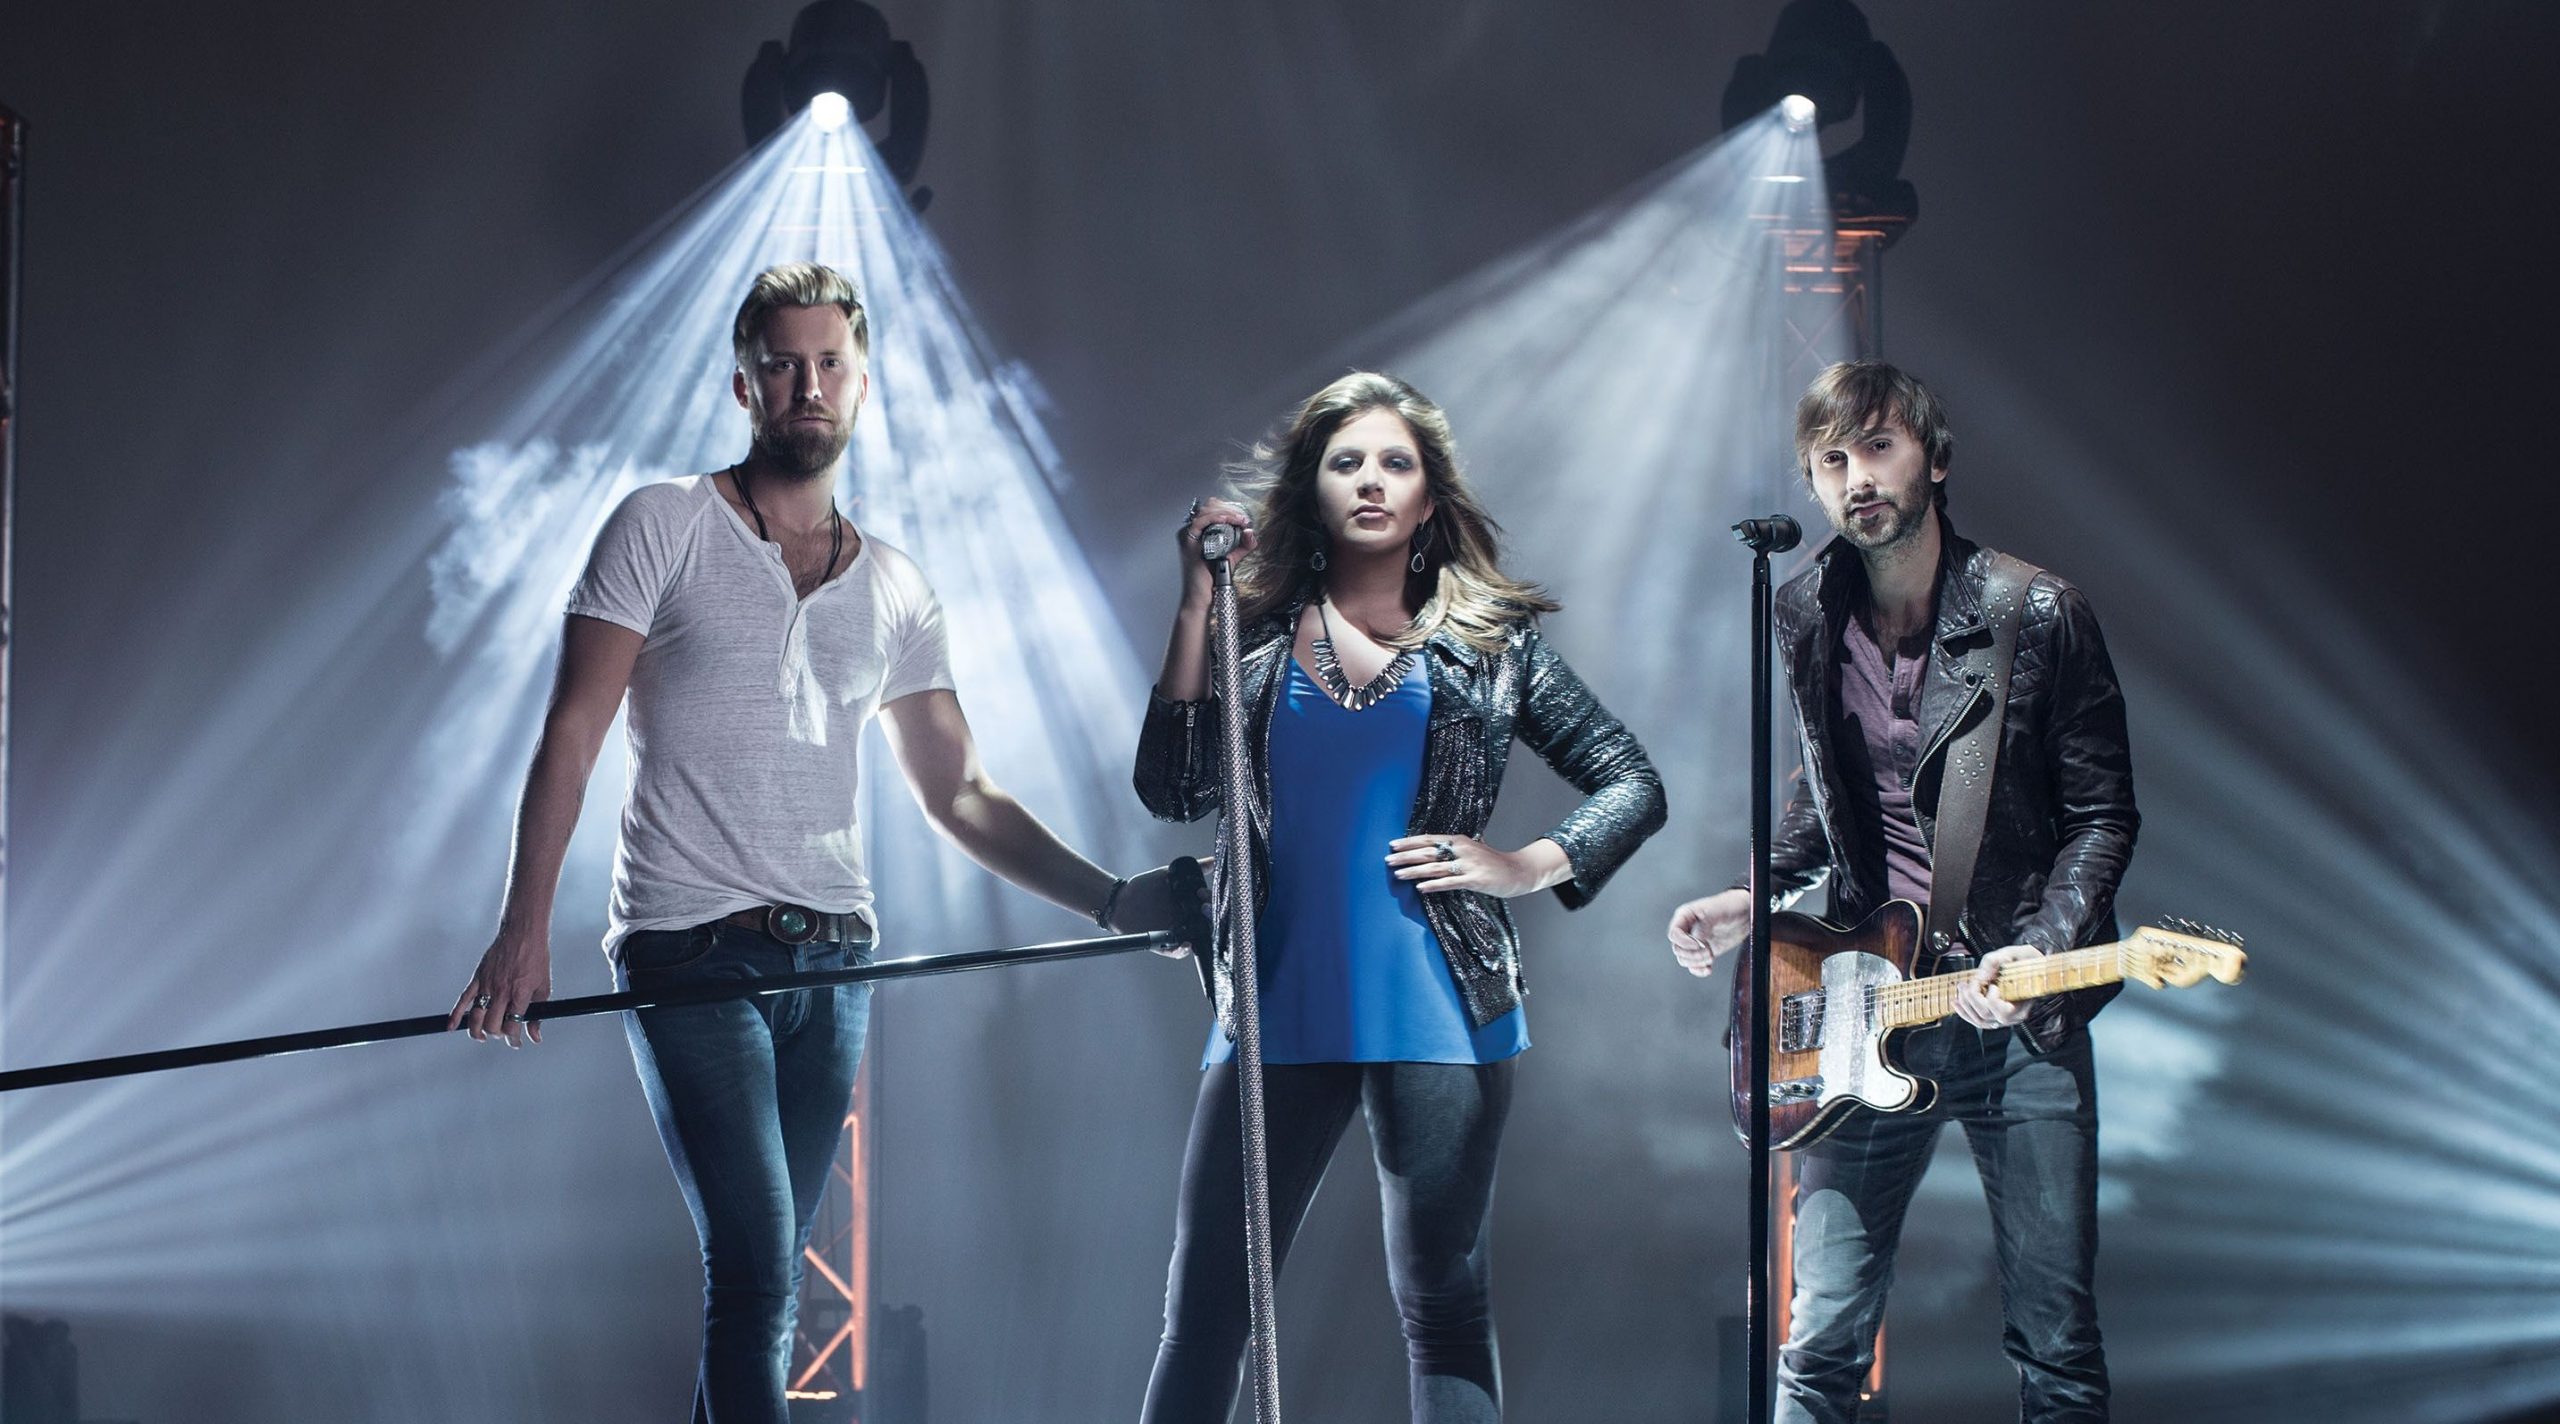 LADY ANTEBELLUM DROPS FUNKY NEW SINGLE “FREESTYLE”